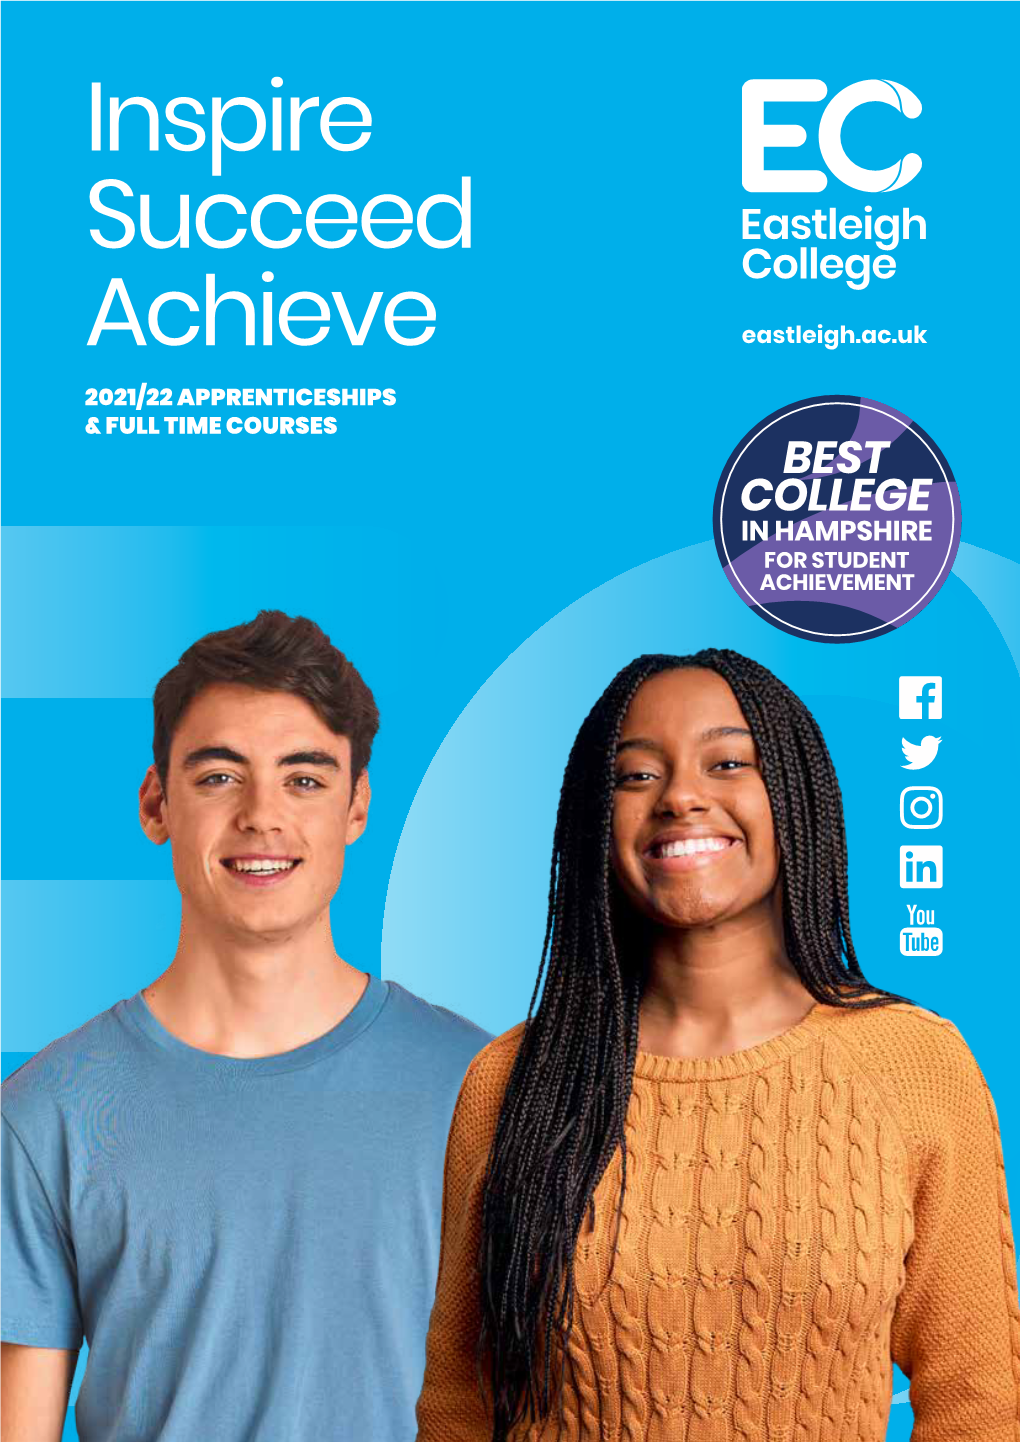 Inspire Succeed Achieve Eastleigh.Ac.Uk 2021/22 APPRENTICESHIPS & FULL TIME COURSES